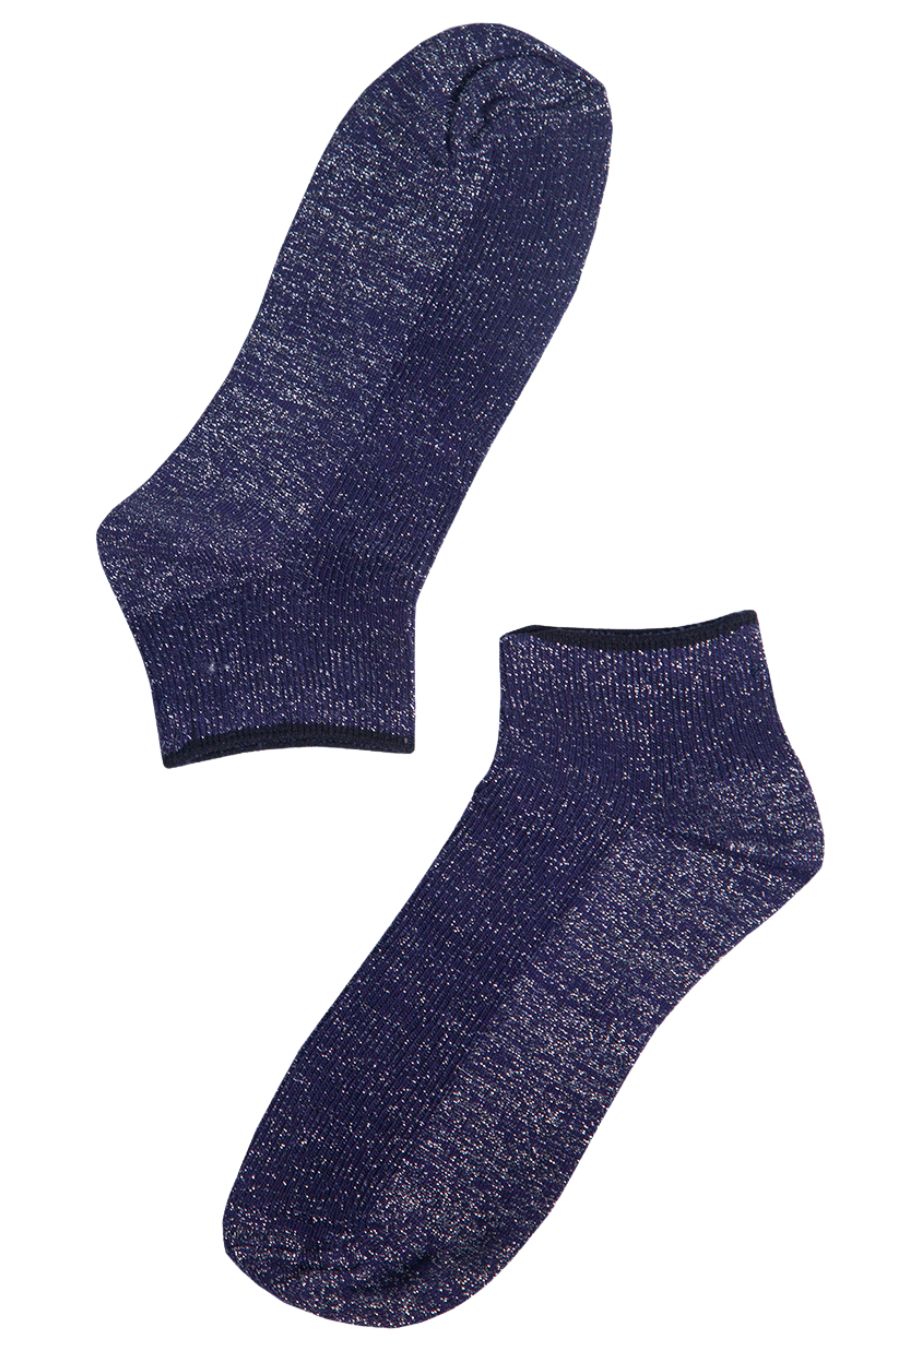 navy blue and silver glitter trainer socks